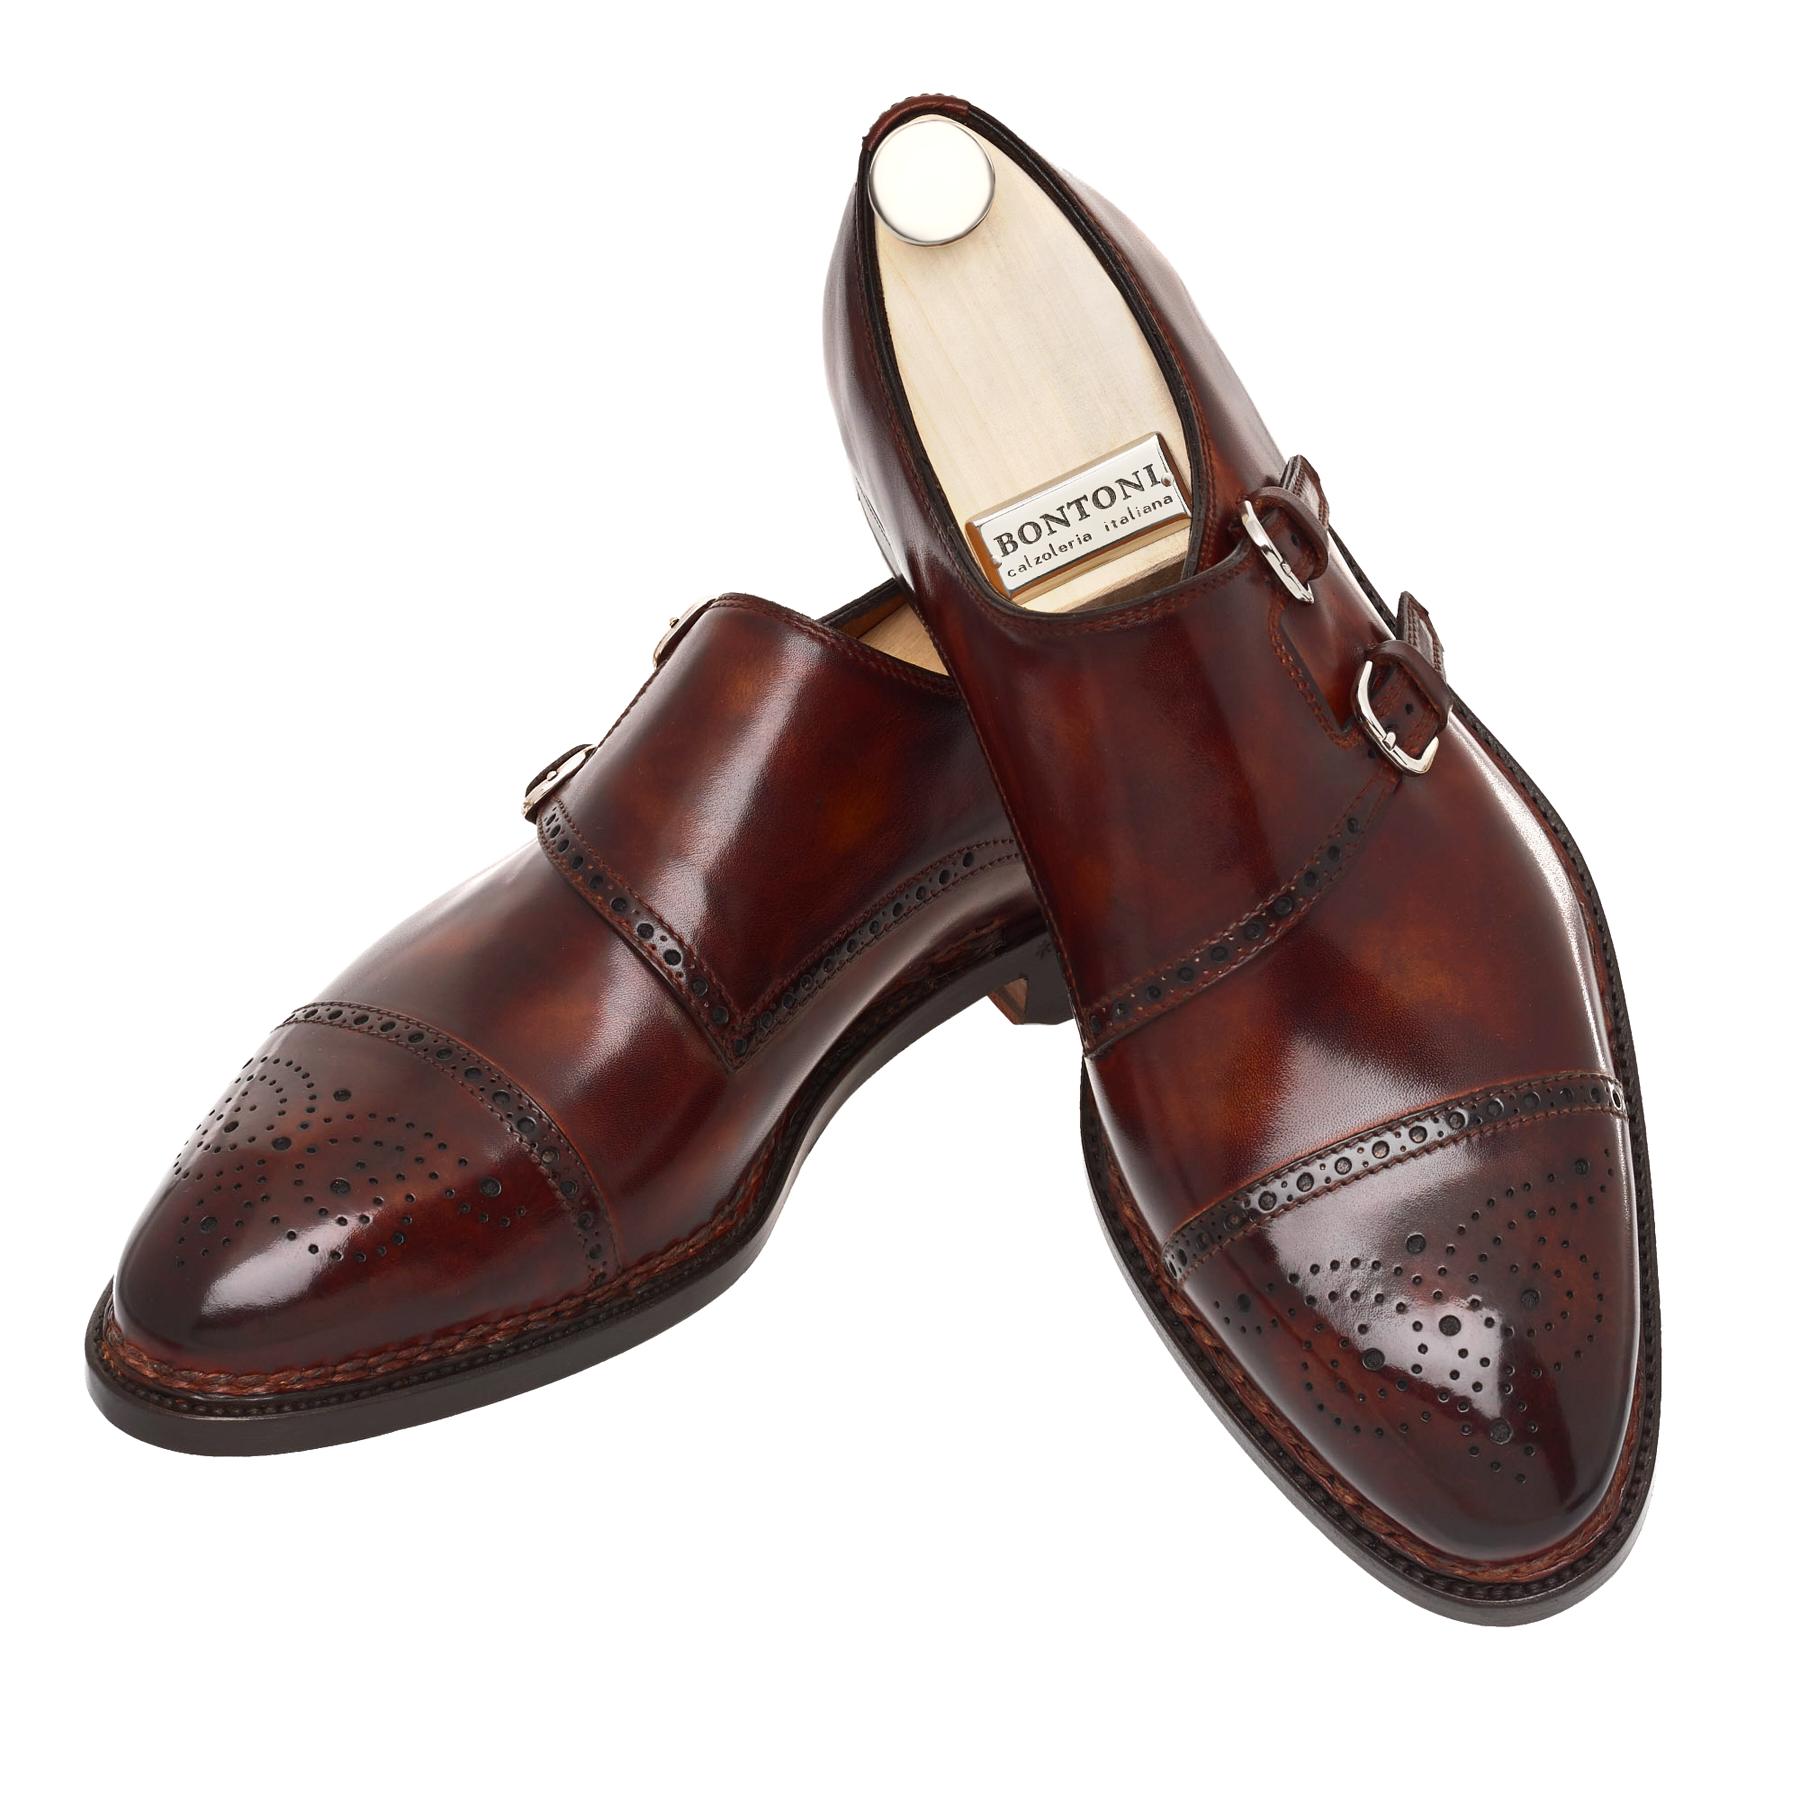 Brown Mens Shoes Slip-on shoes Monk shoes Bontoni Leather excelsior Triple-buckle Monk With Perforated Details And Medallion in Rust for Men 